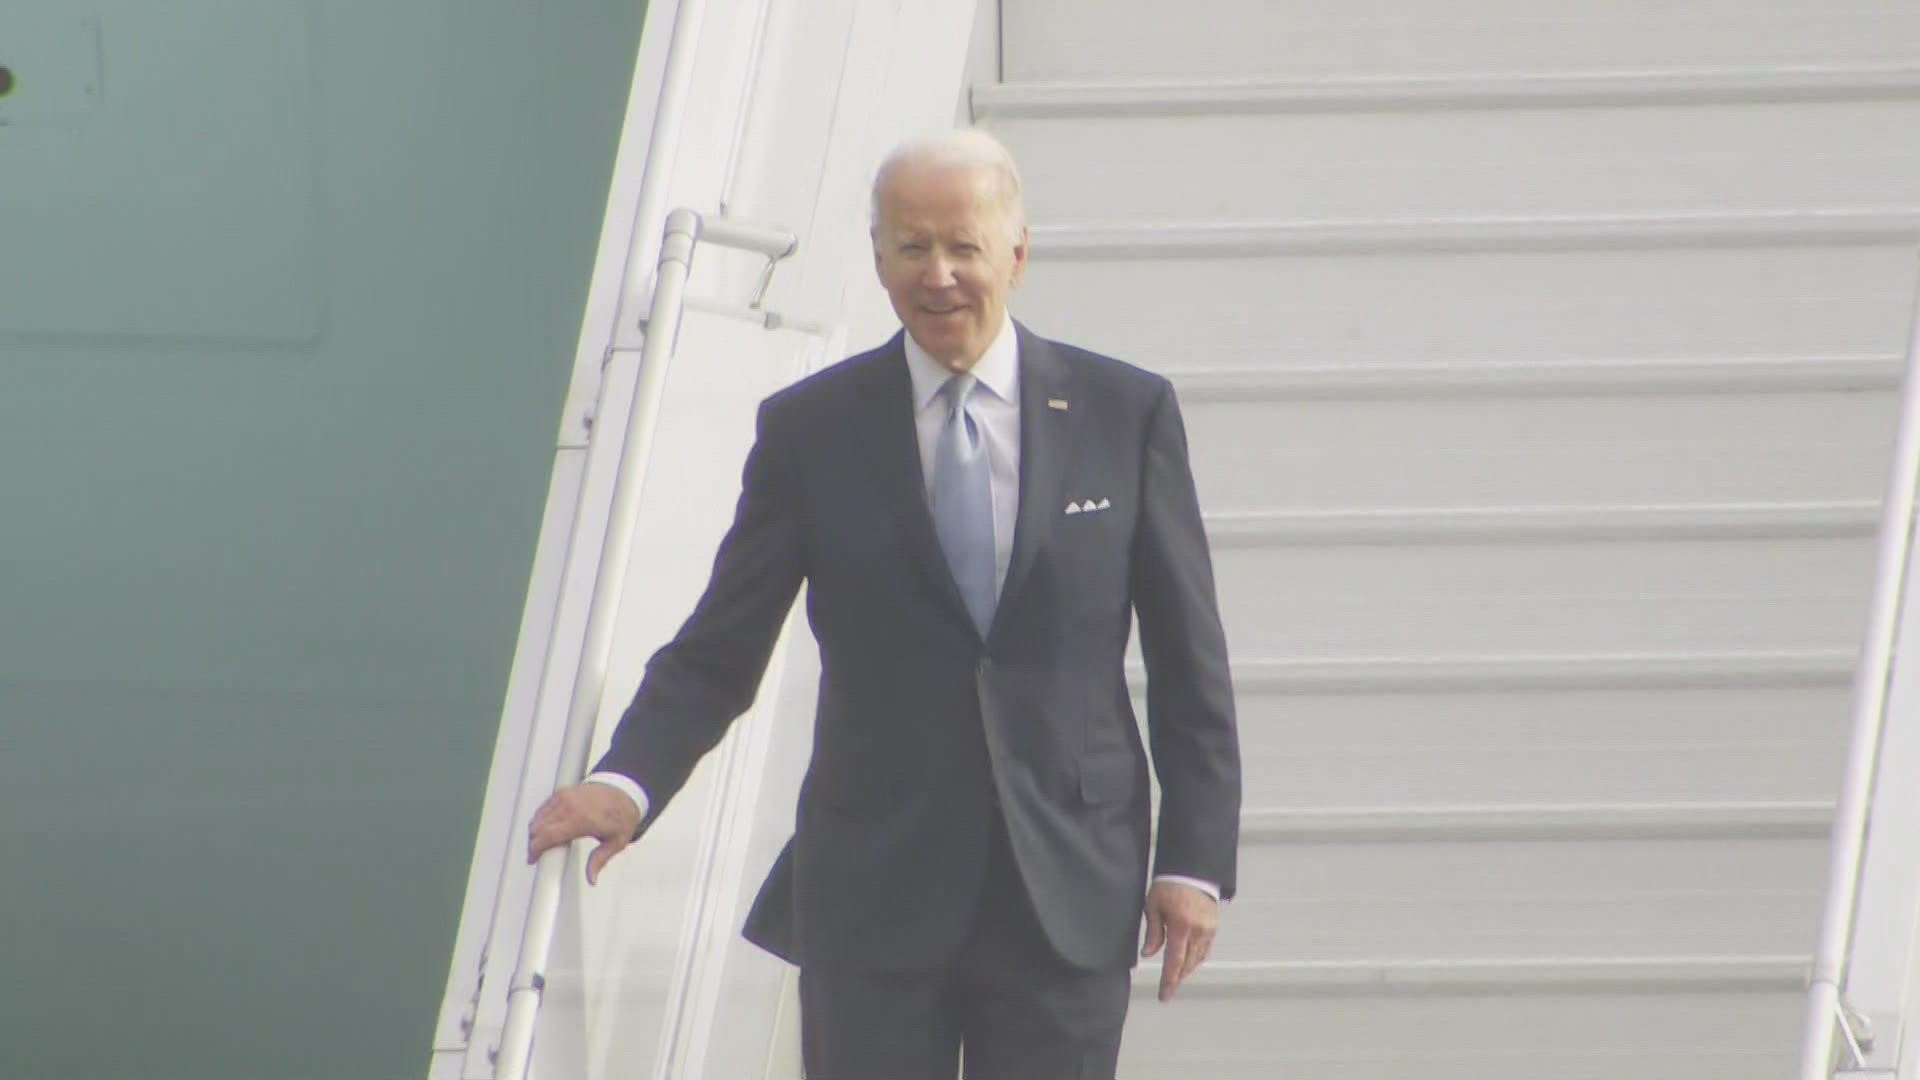 Biden will give a speech about his administration's efforts to grow the clean energy economy and lower costs for families.